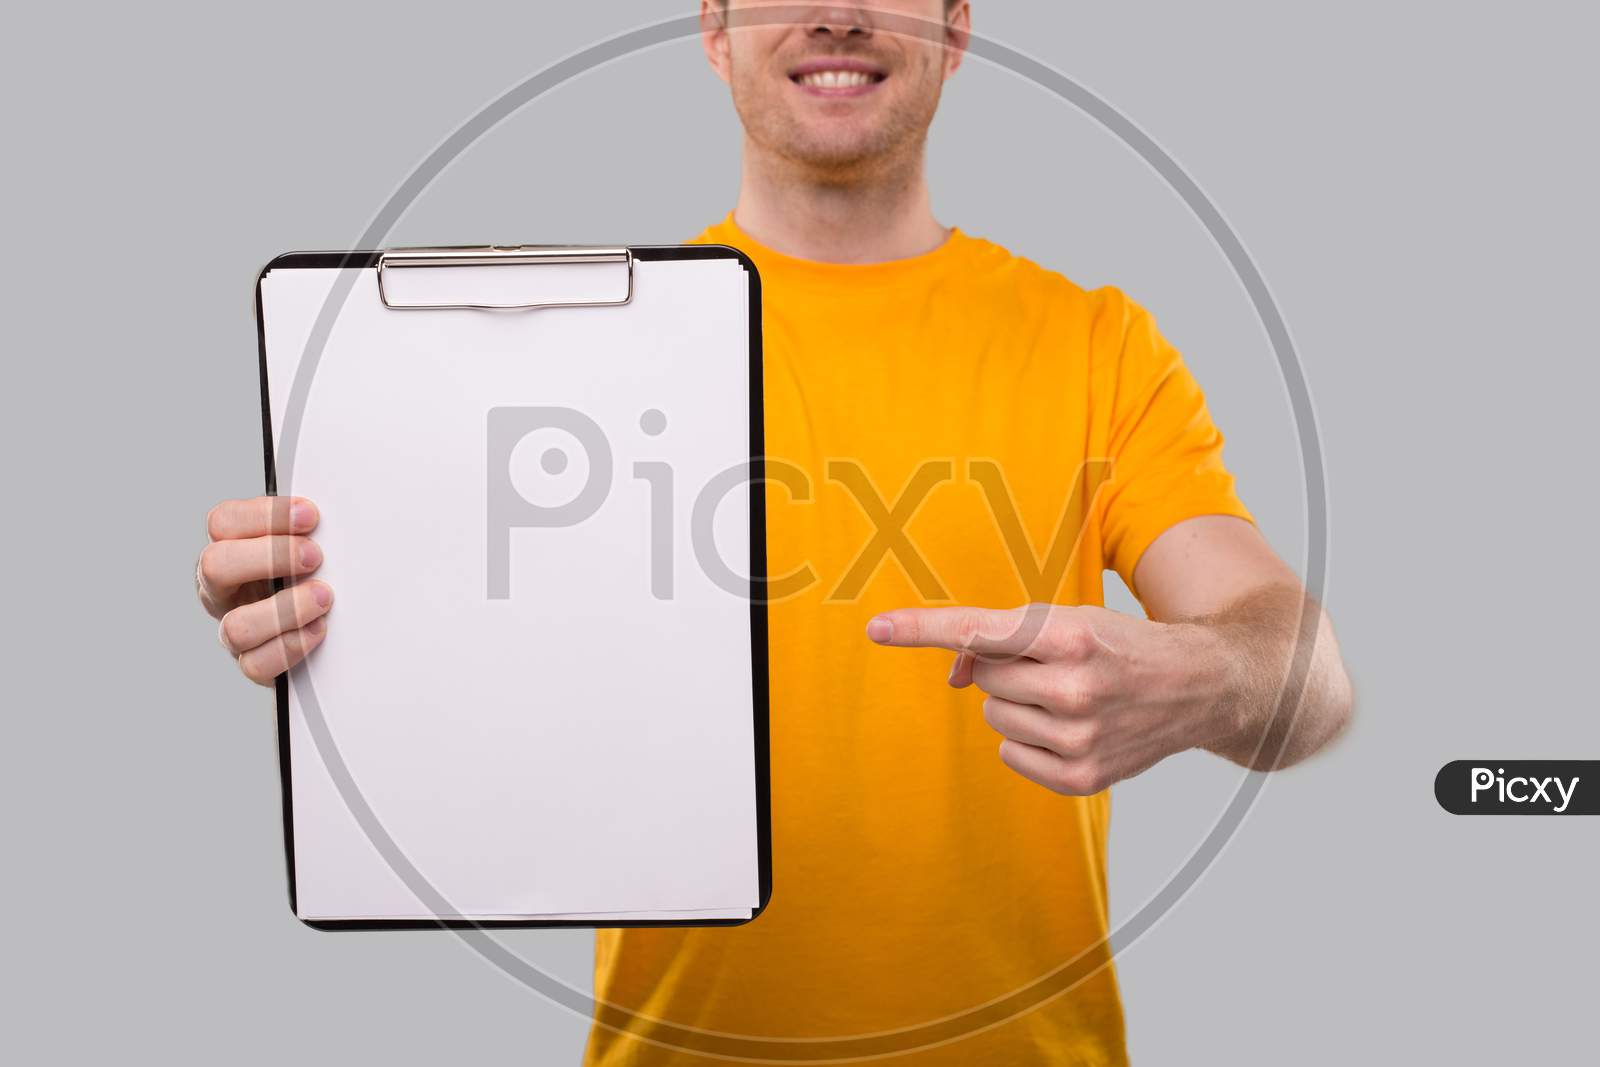 Man Pointing In Clipboard. Blank Clipboard In Hands. Close Up